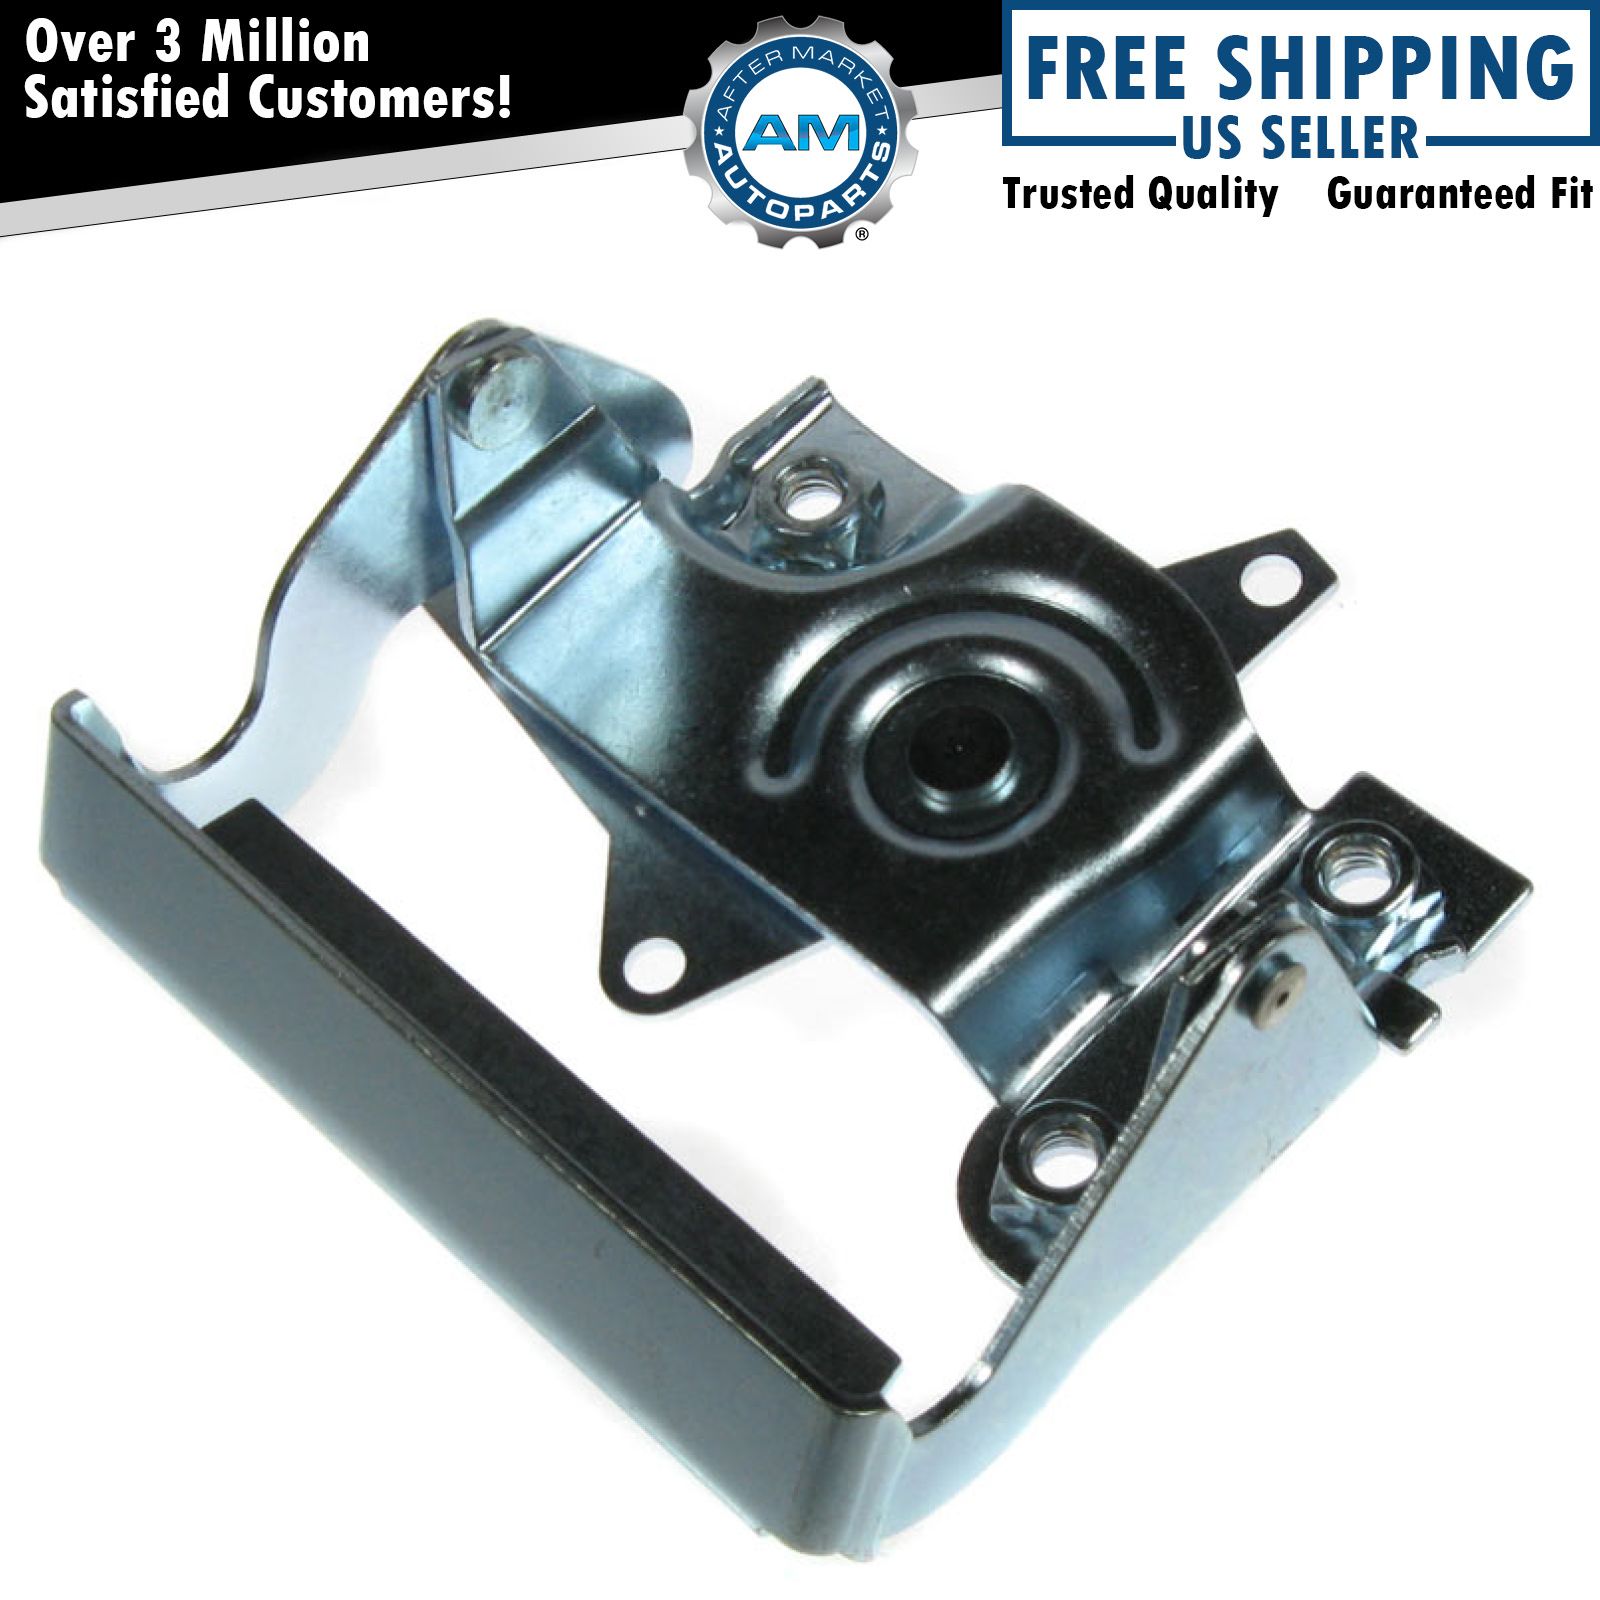 Tailgate Tail Gate Handle Steel Rear for 73-79 Ford F100 F150 F250 F350